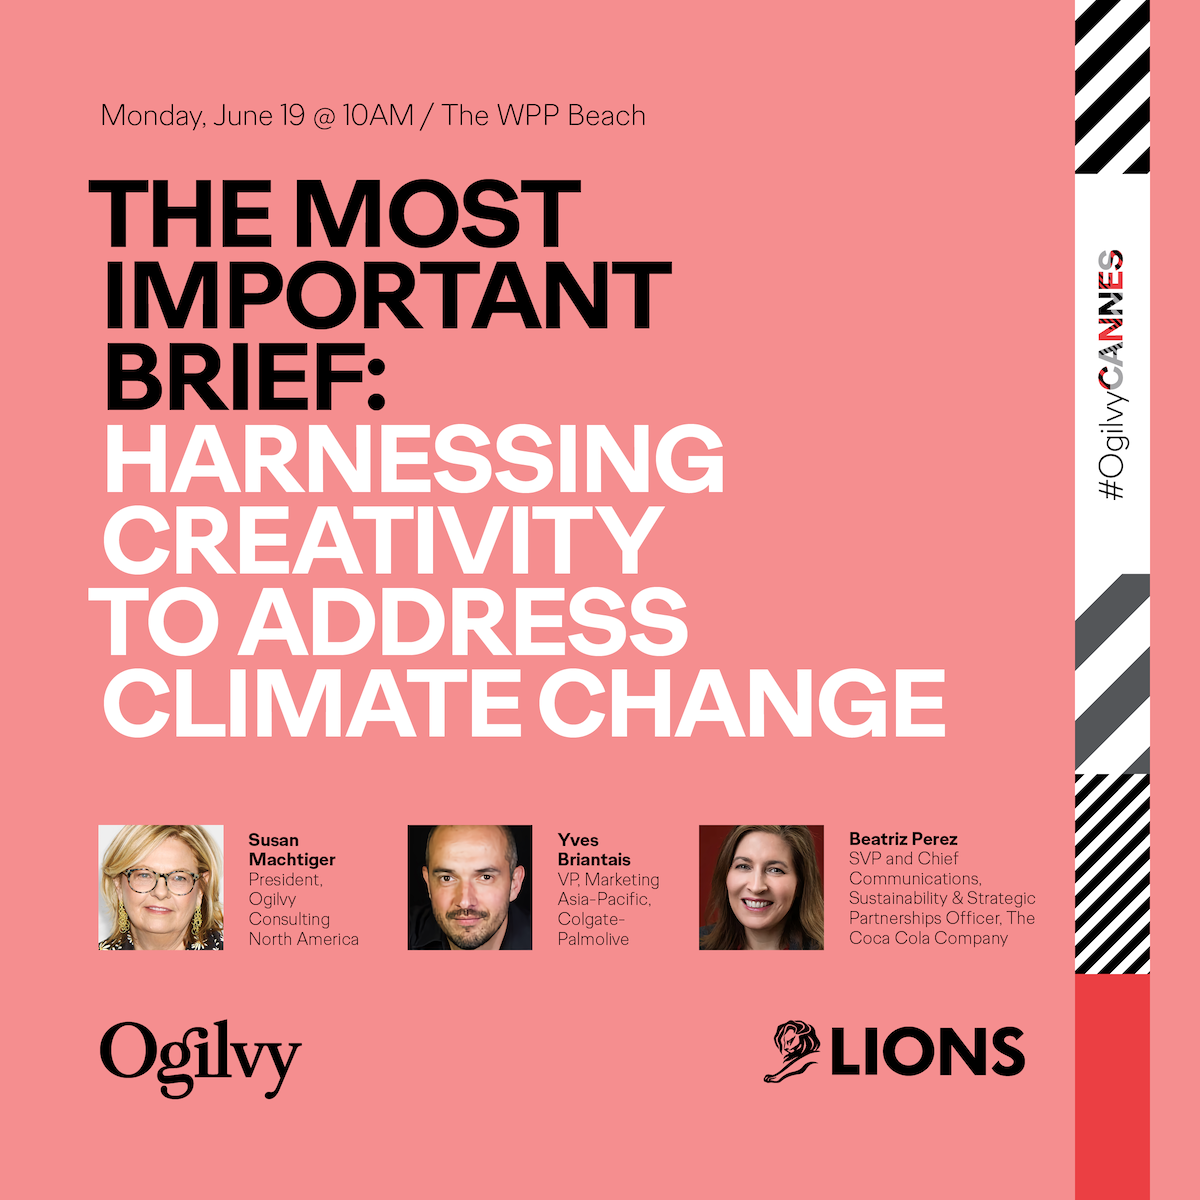 The Most Important Brief: Harnessing Creativity to Address Climate Change